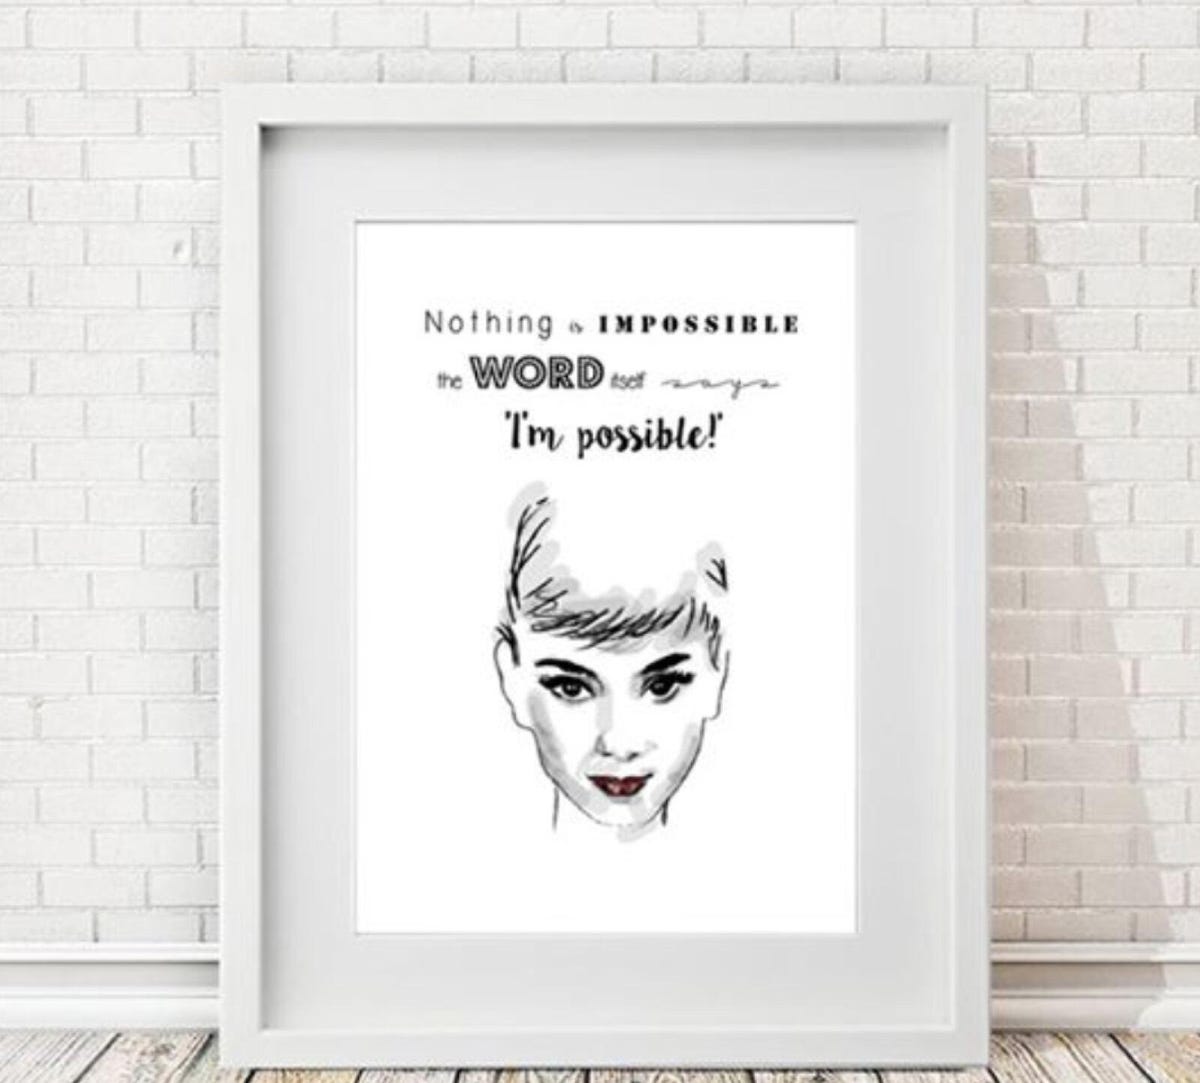 Ethical Market print of Audrey Hepburn and famous quote: Nothing is impossible, the word itself says I'm possible